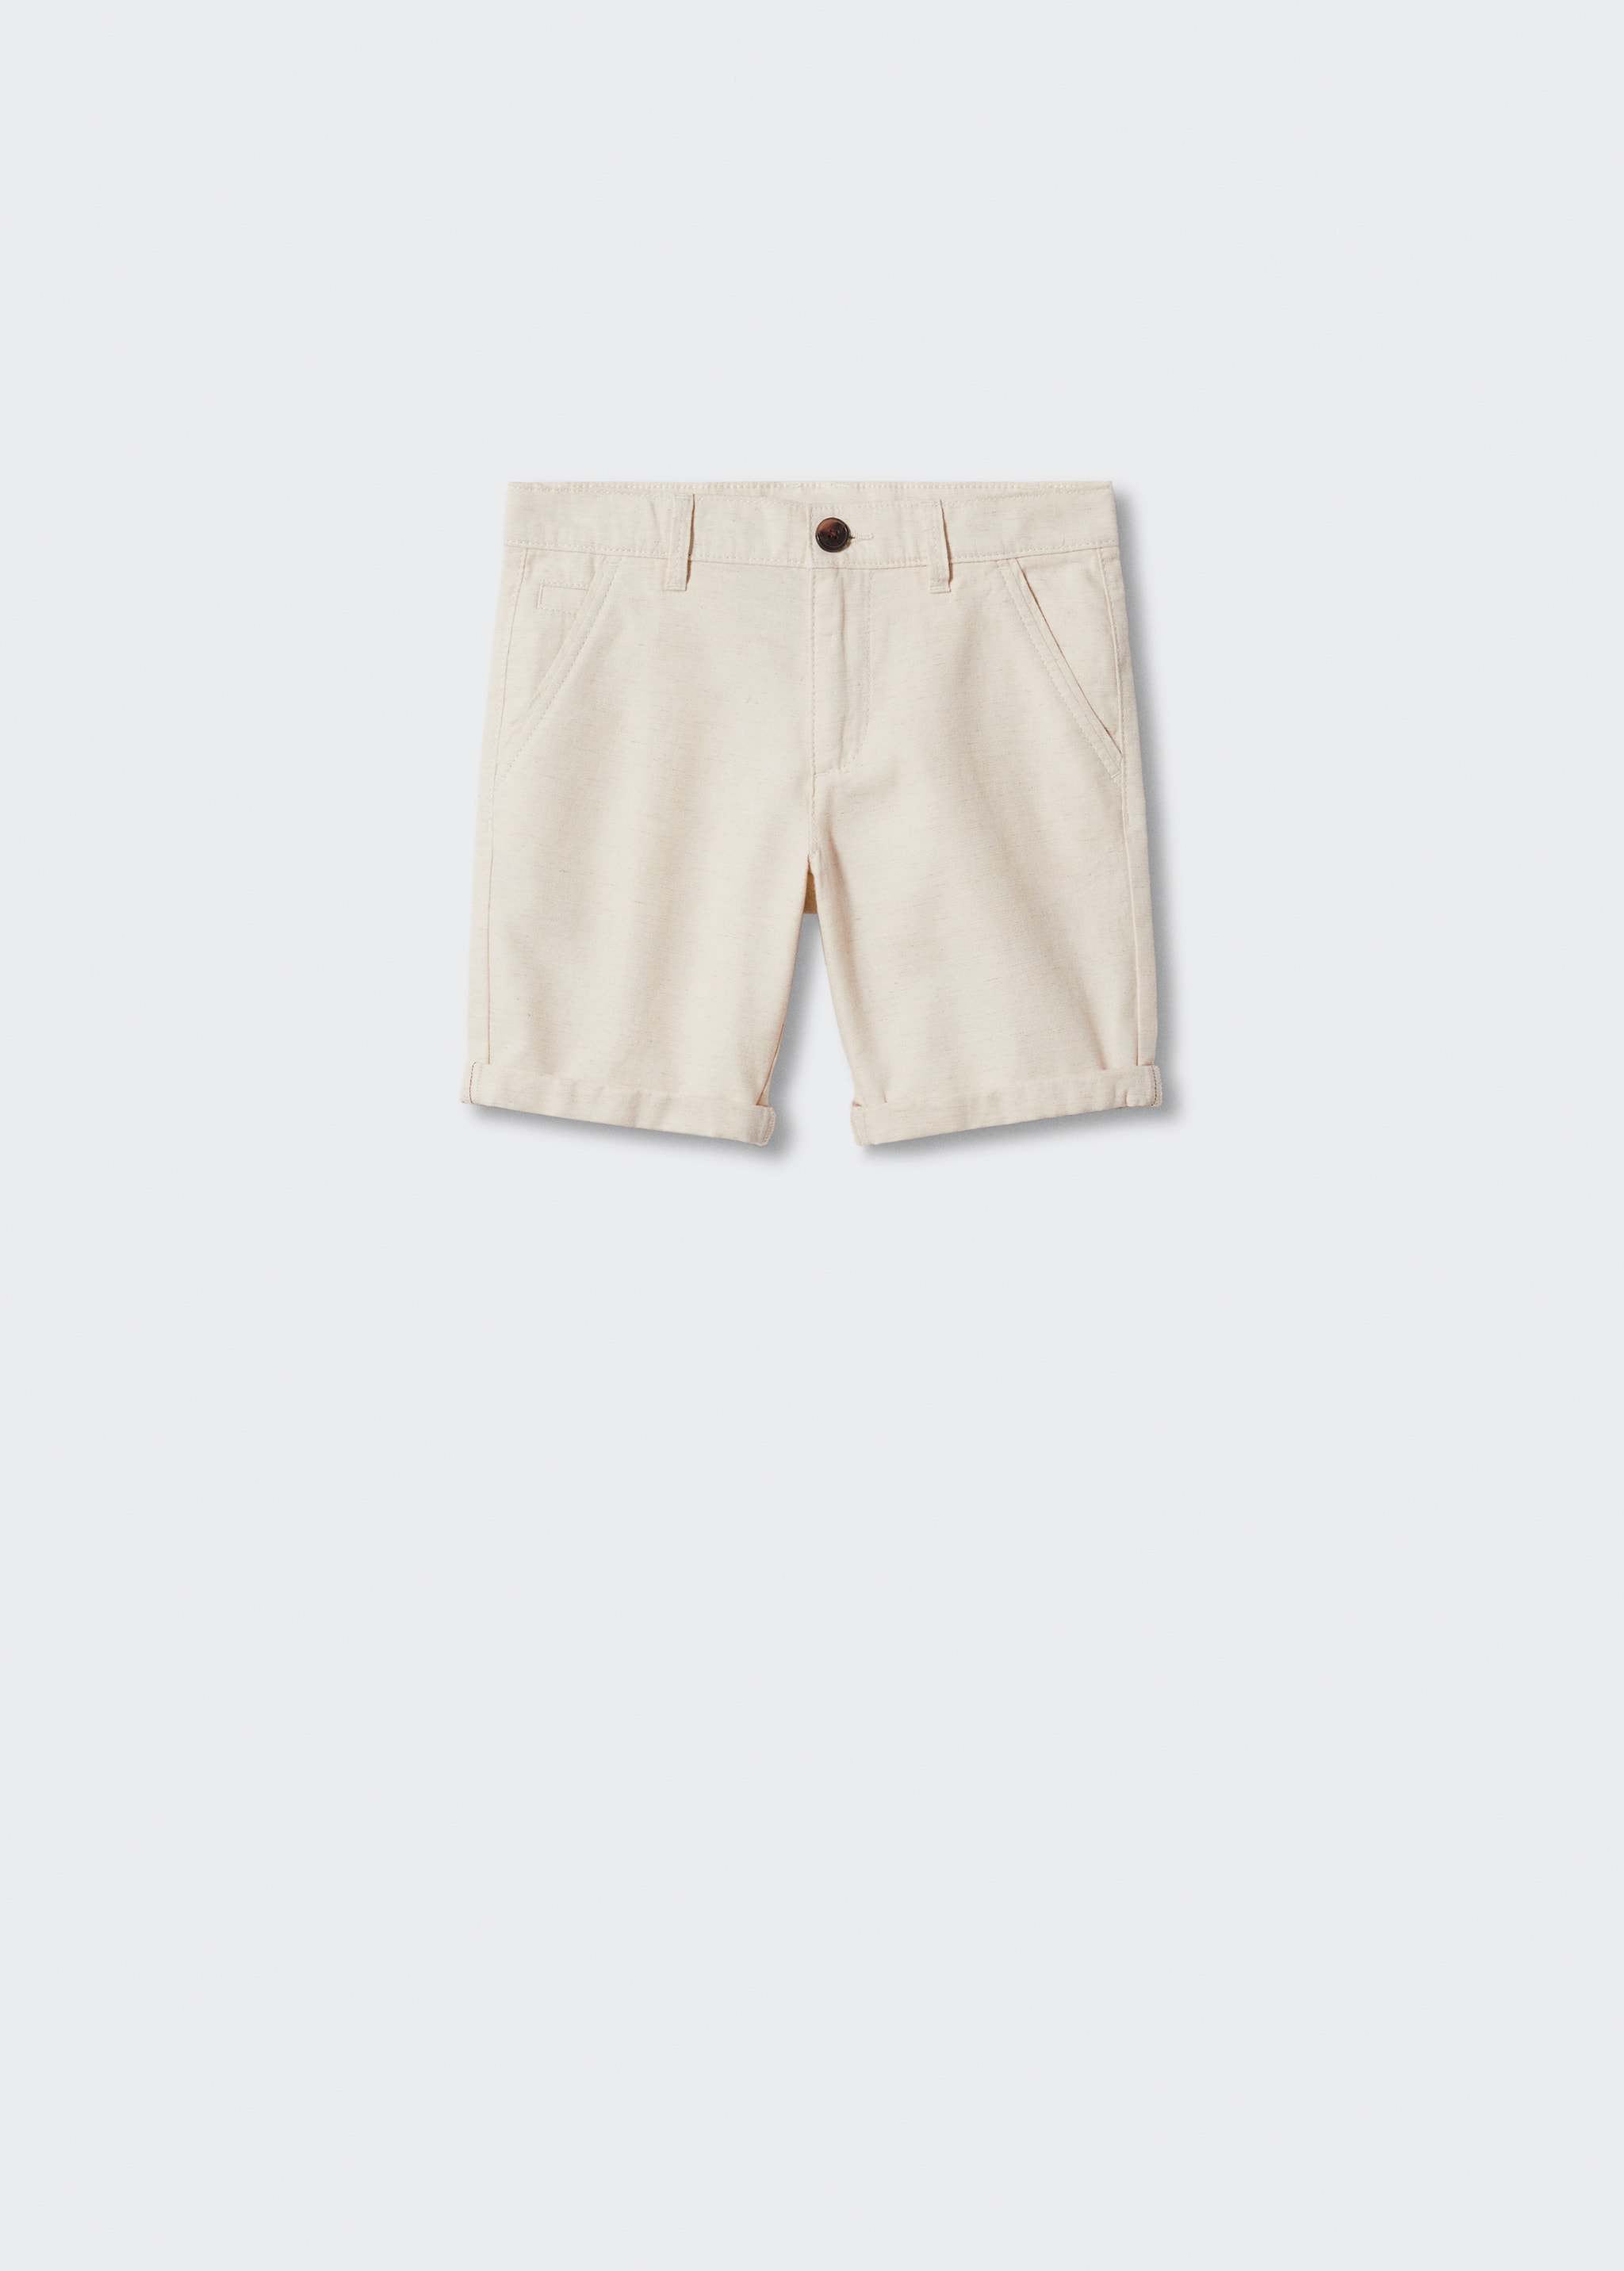 Linen chino Bermuda shorts - Article without model